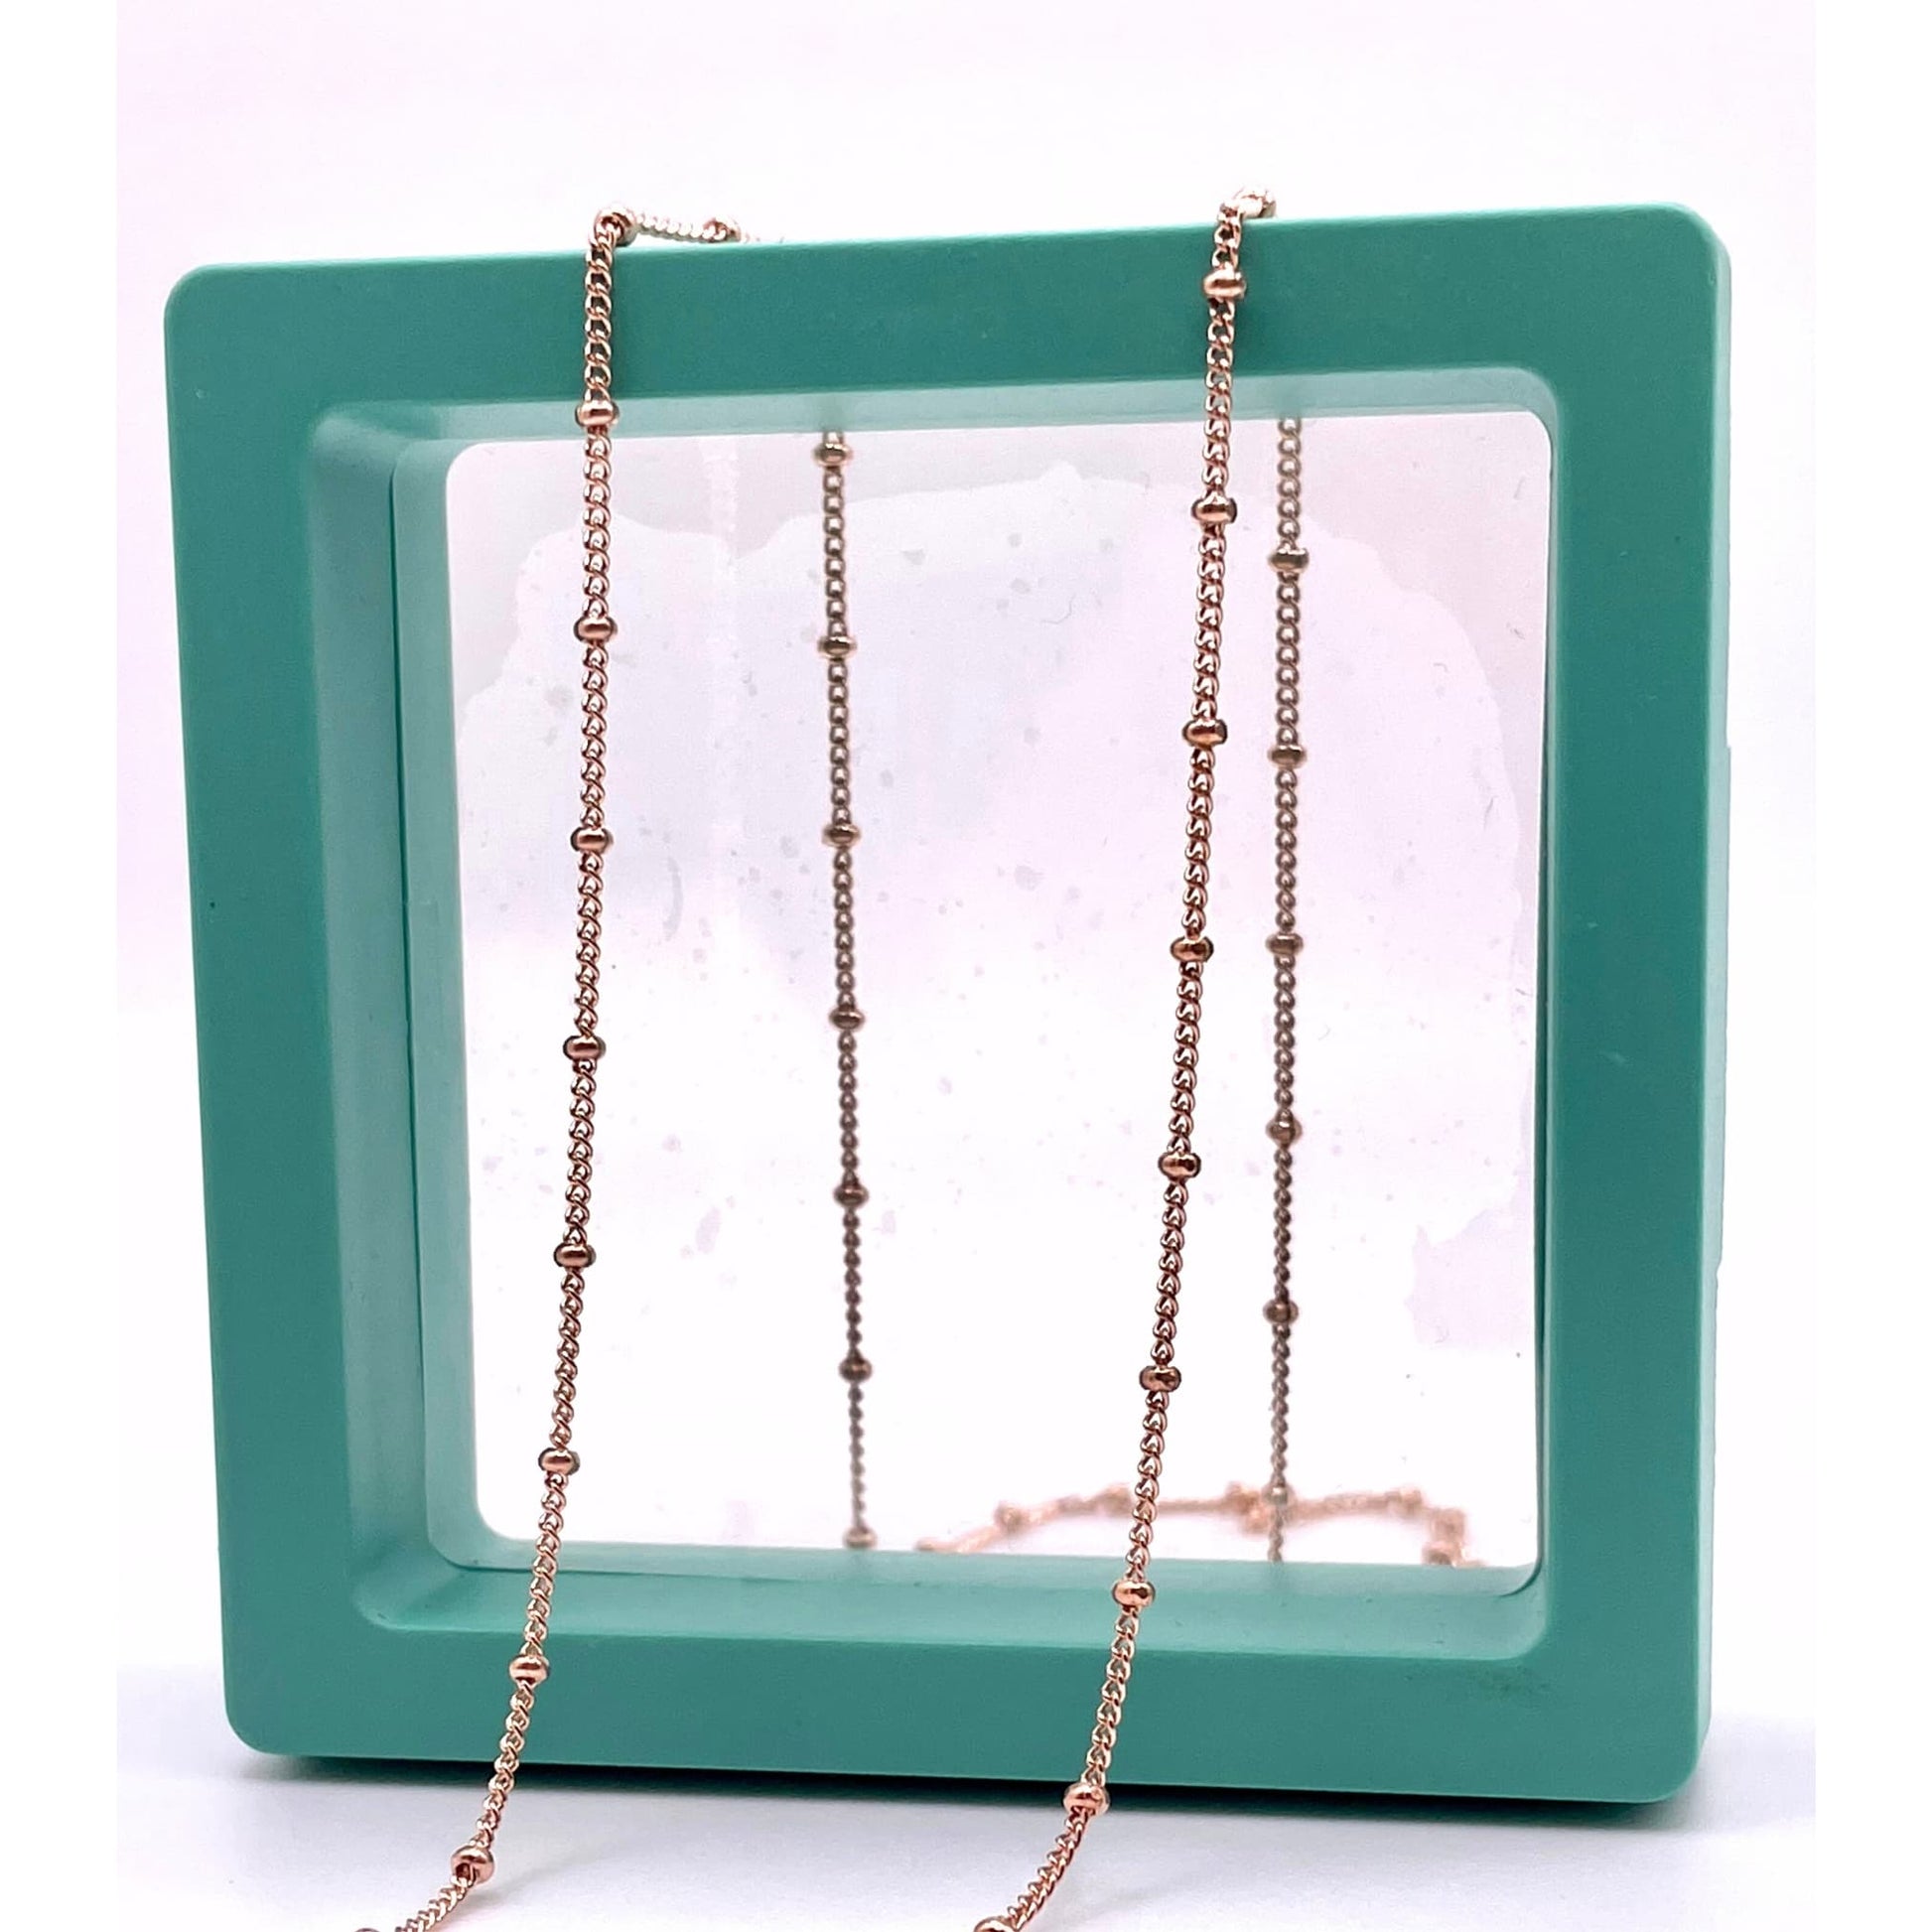 14k rose gold filled satellite chain for permanent jewelry in a green hallow box.